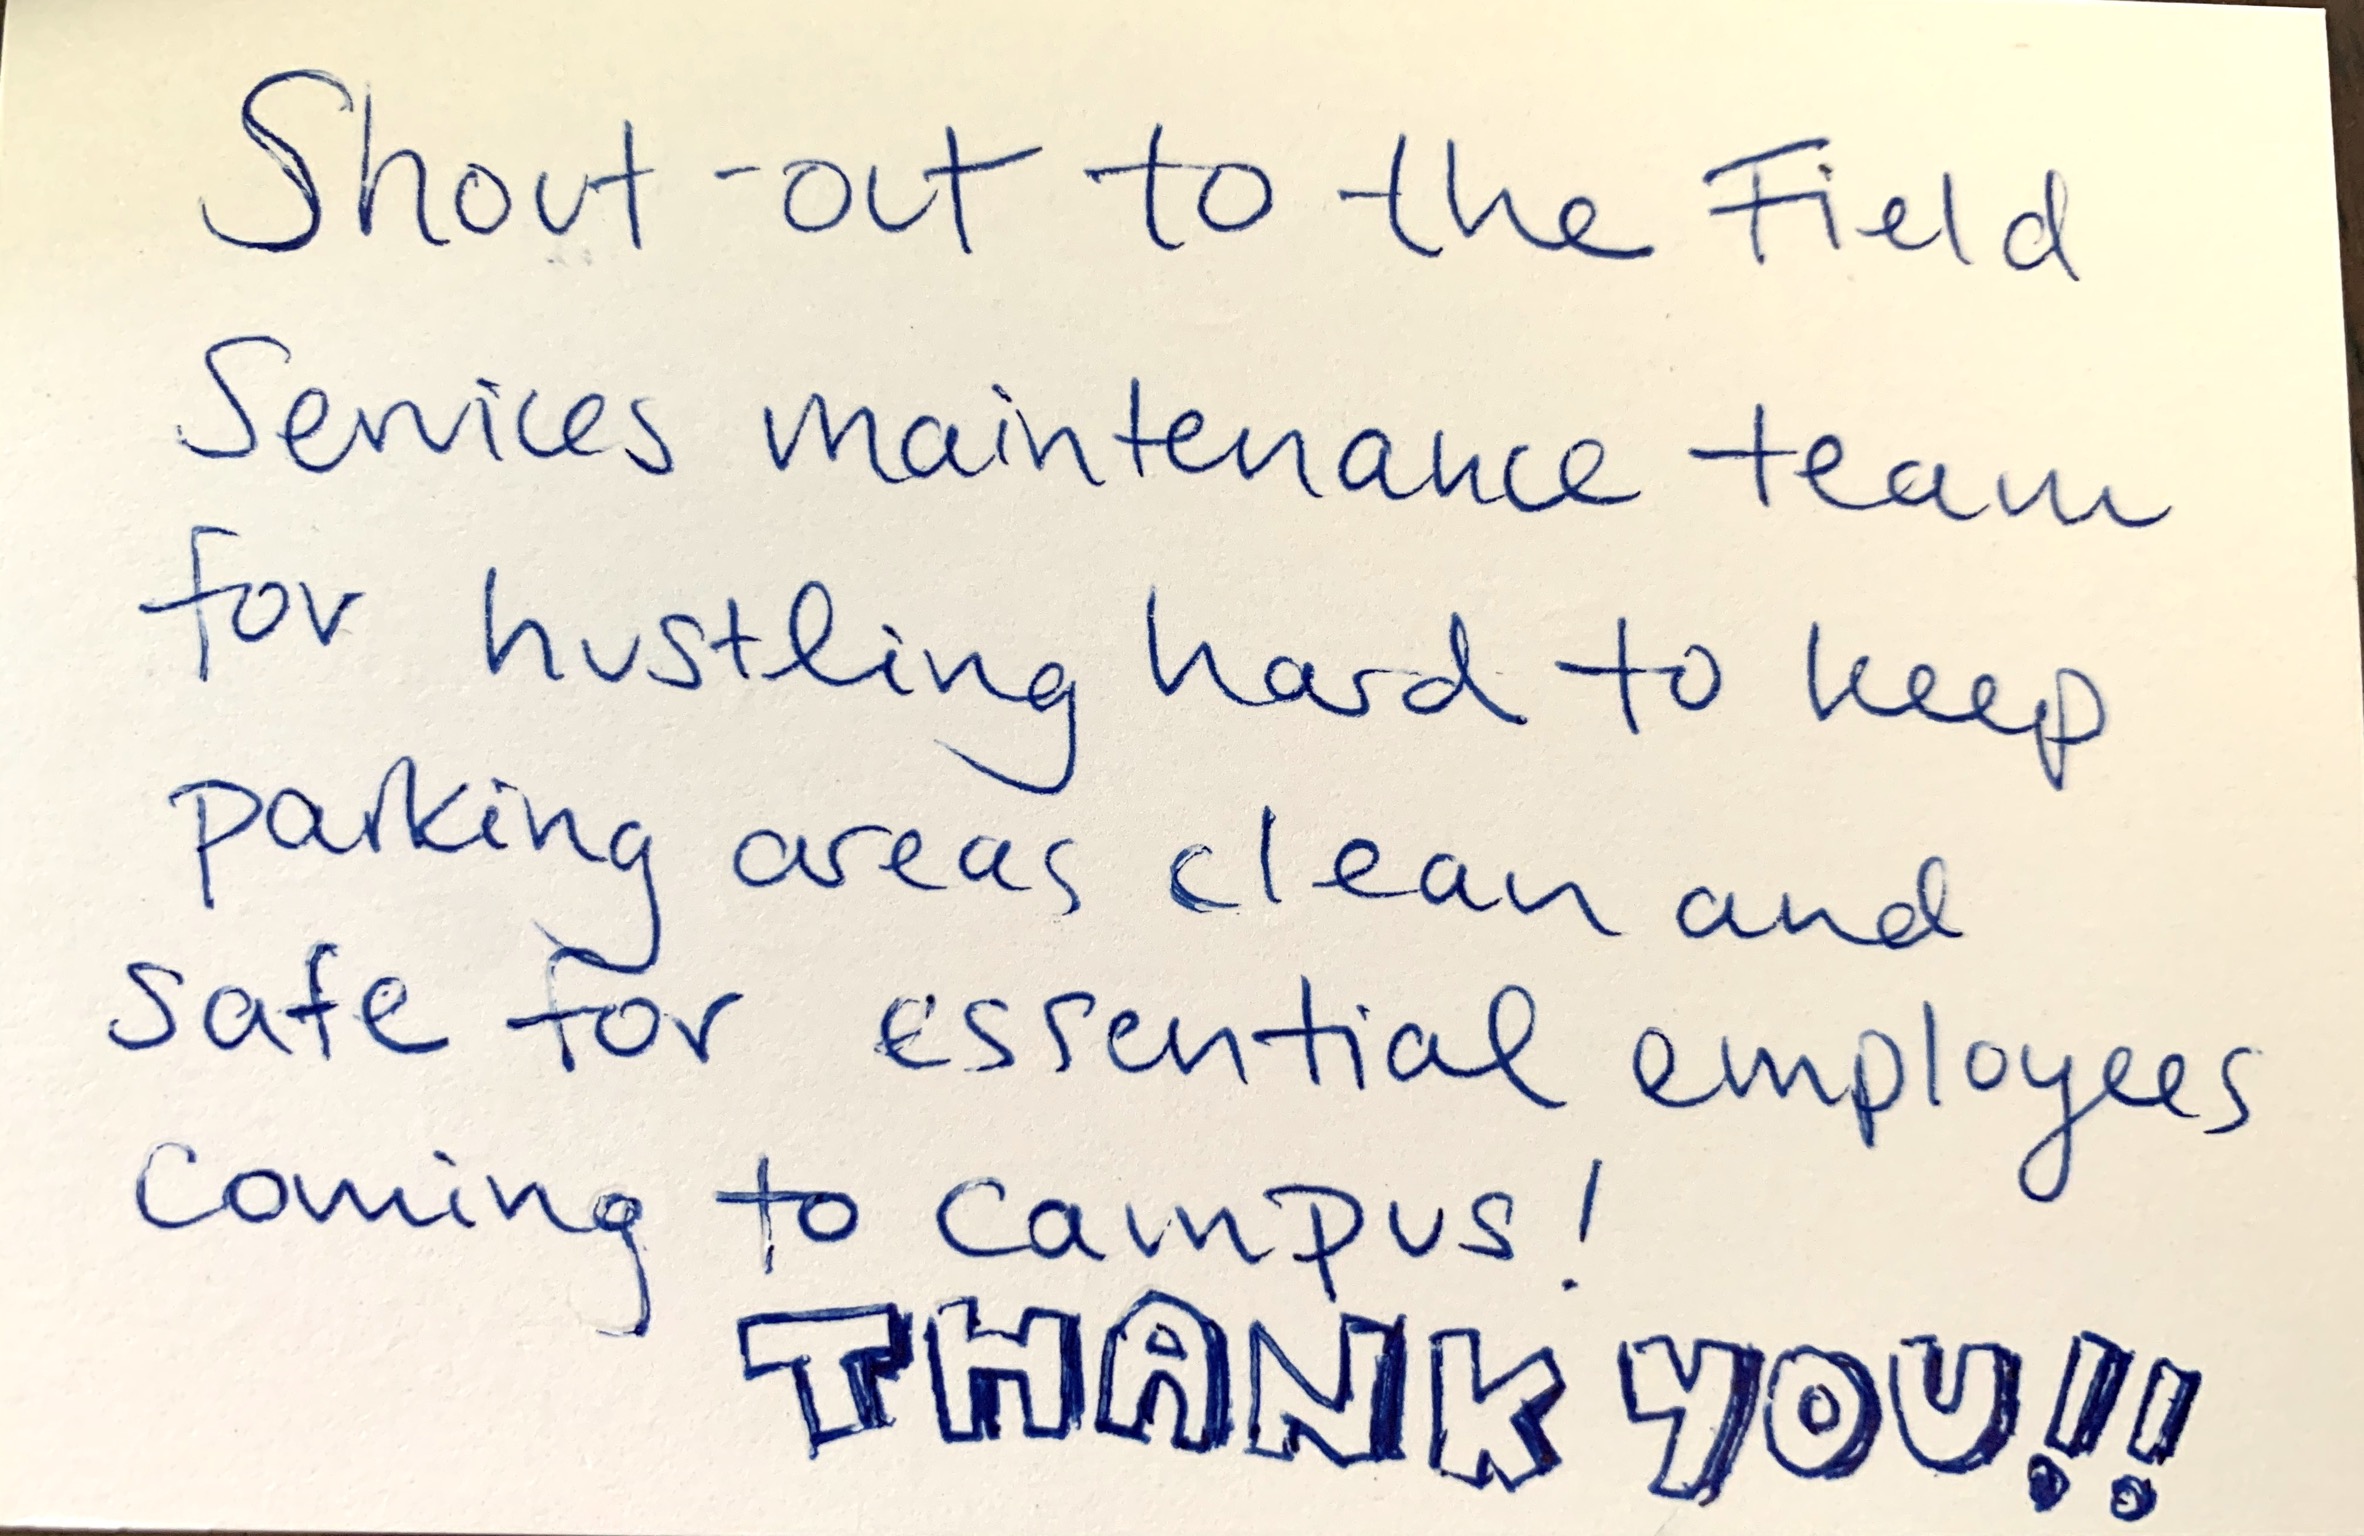 Shout-out to the FIeld Services Maintenance Team for hustling hard to keep parking areas clen and safe for essential eployees coming to campus! THANK YOU!!